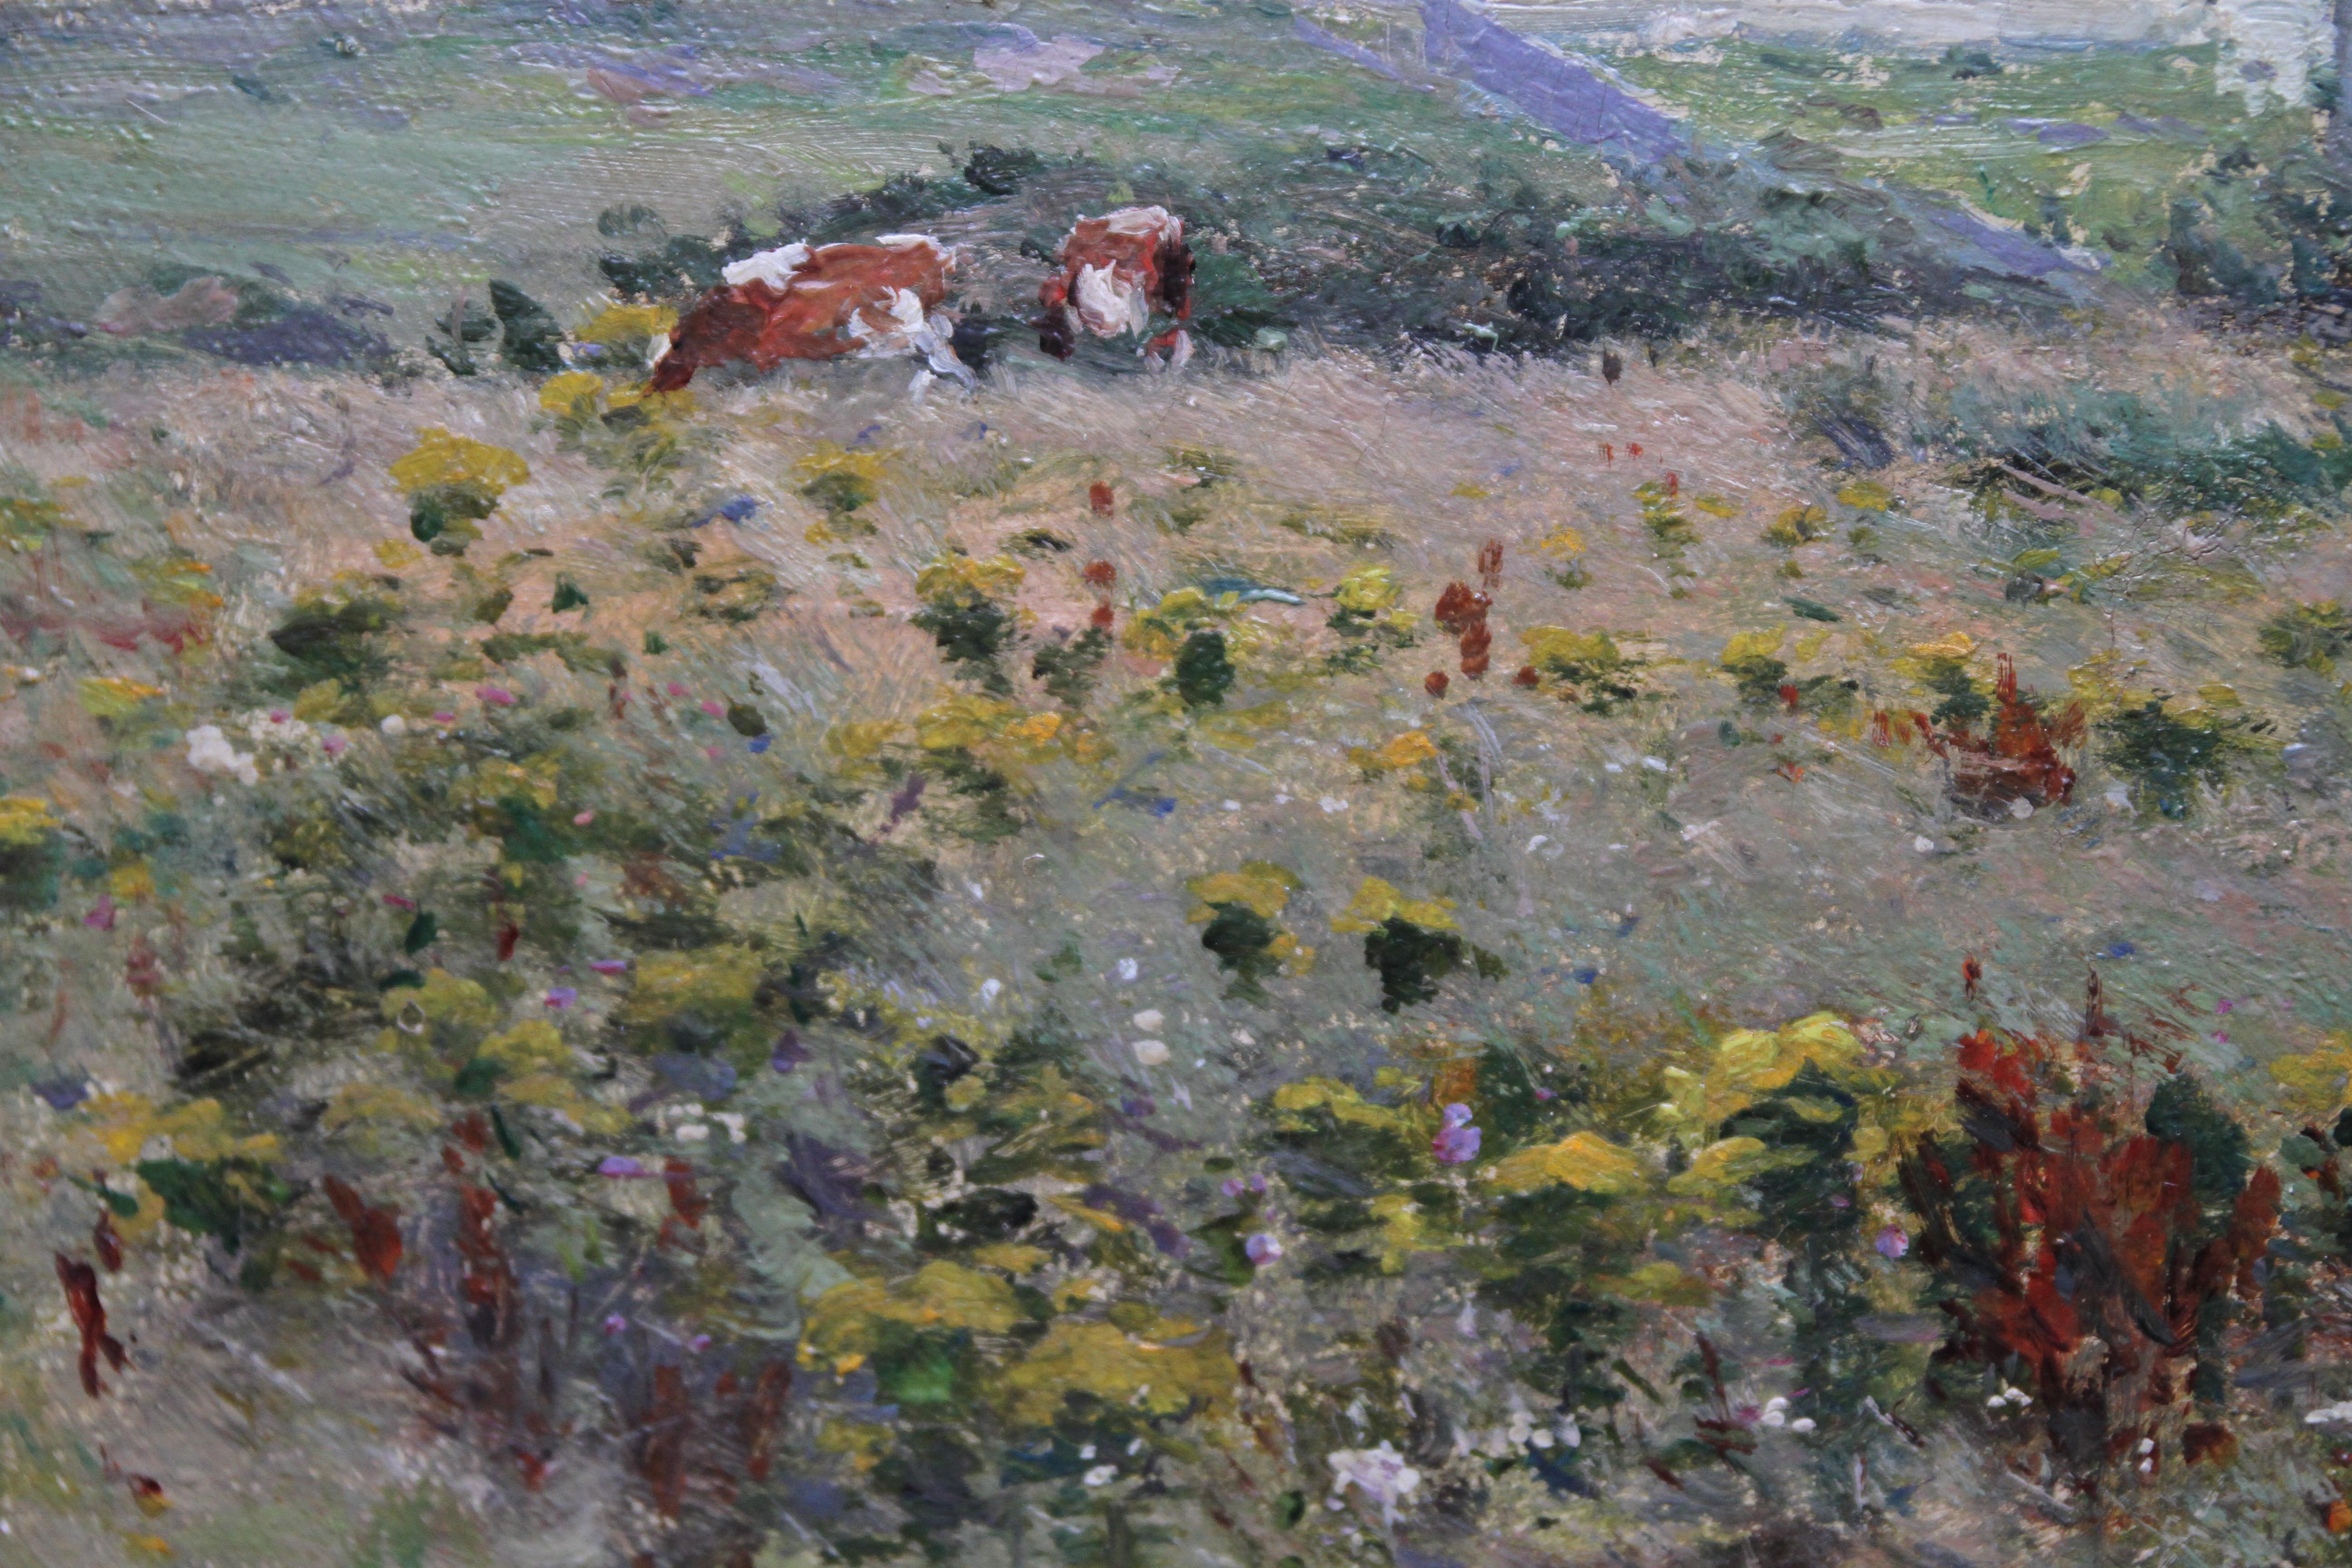 This superb Impressionist original oil painting is by Scottish artist Joseph Morris Henderson and dates to circa 1900. The painting depicts summer fields with wild flowers and cattle a joining a wide river. A bridge crosses the river and to the left